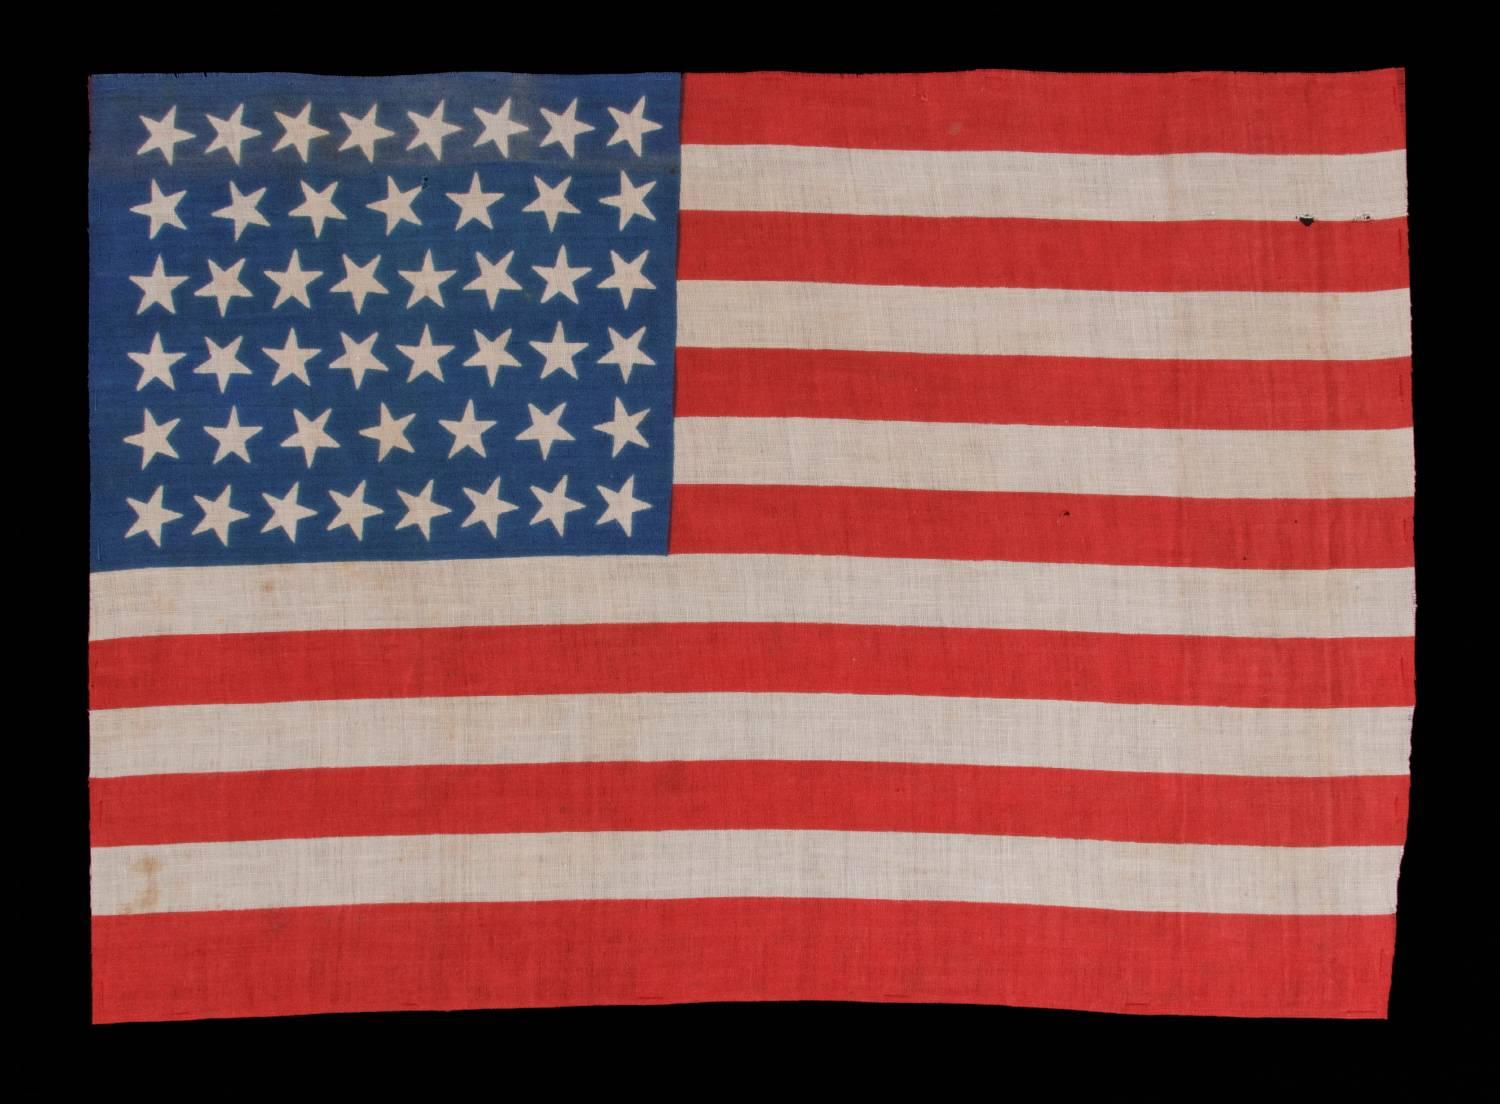 46 STARS ON A BRILLIANT ROYAL BLUE CANTON, ON AN ANTIQUE AMERICAN FLAG OF THE 1907-1912 PERIOD, OKLAHOMA STATEHOOD, SCATTERED STAR POSITIONING: 

46 star American parade flag, printed on cotton. The stars are arranged in a rectilinear fashion, but